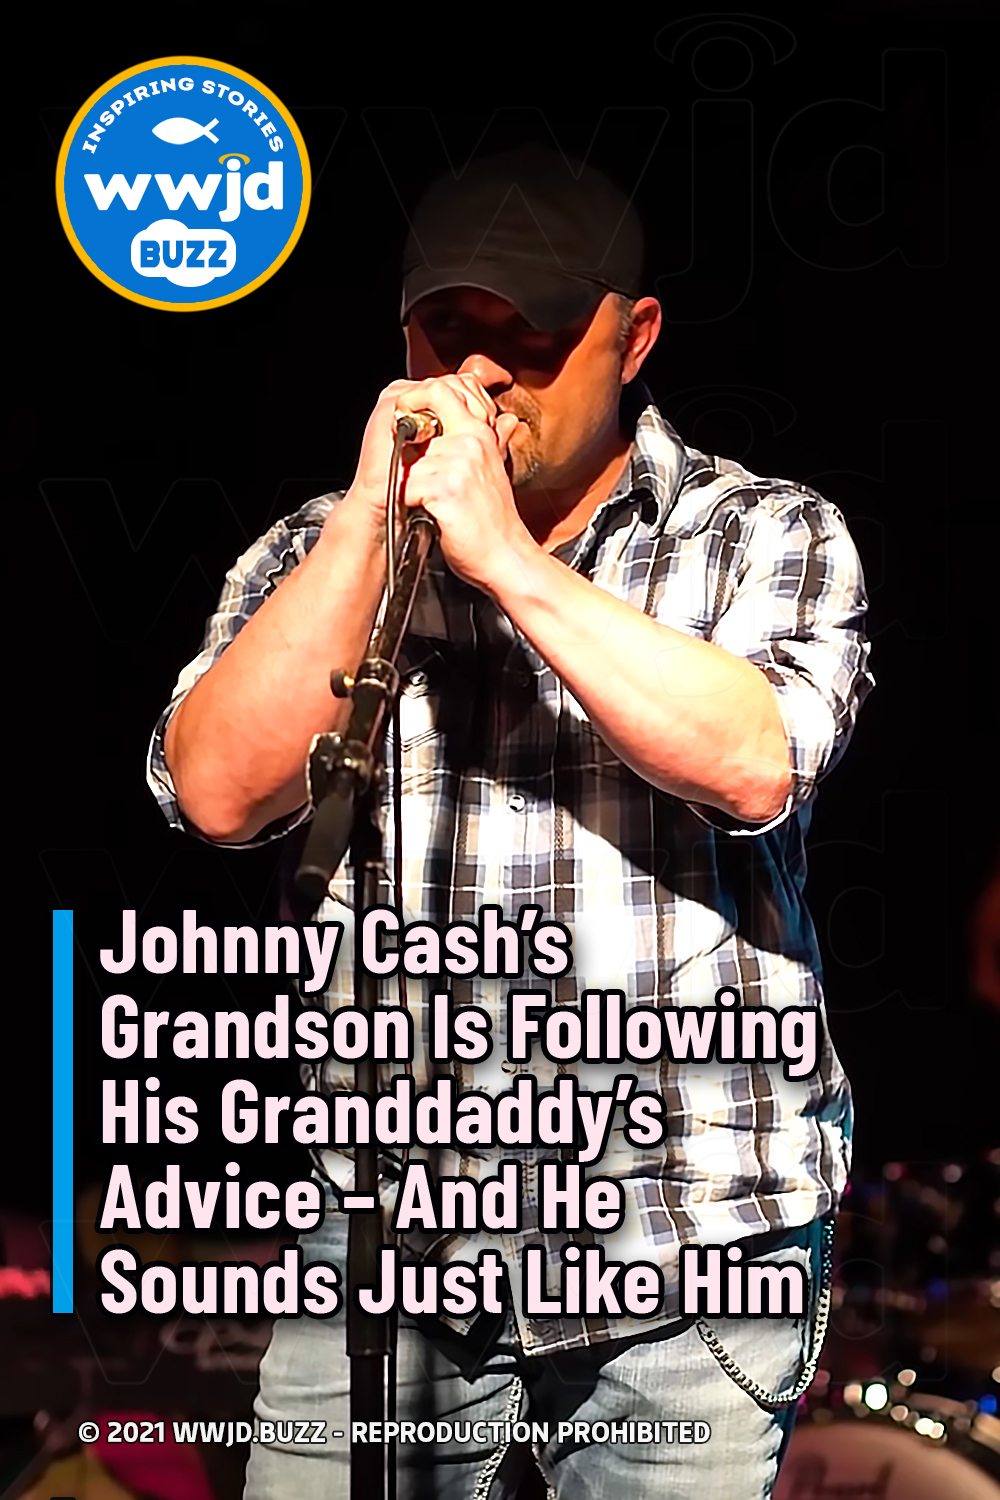 Johnny Cash’s Grandson Is Following His Granddaddy’s Advice - And He Sounds Just Like Him